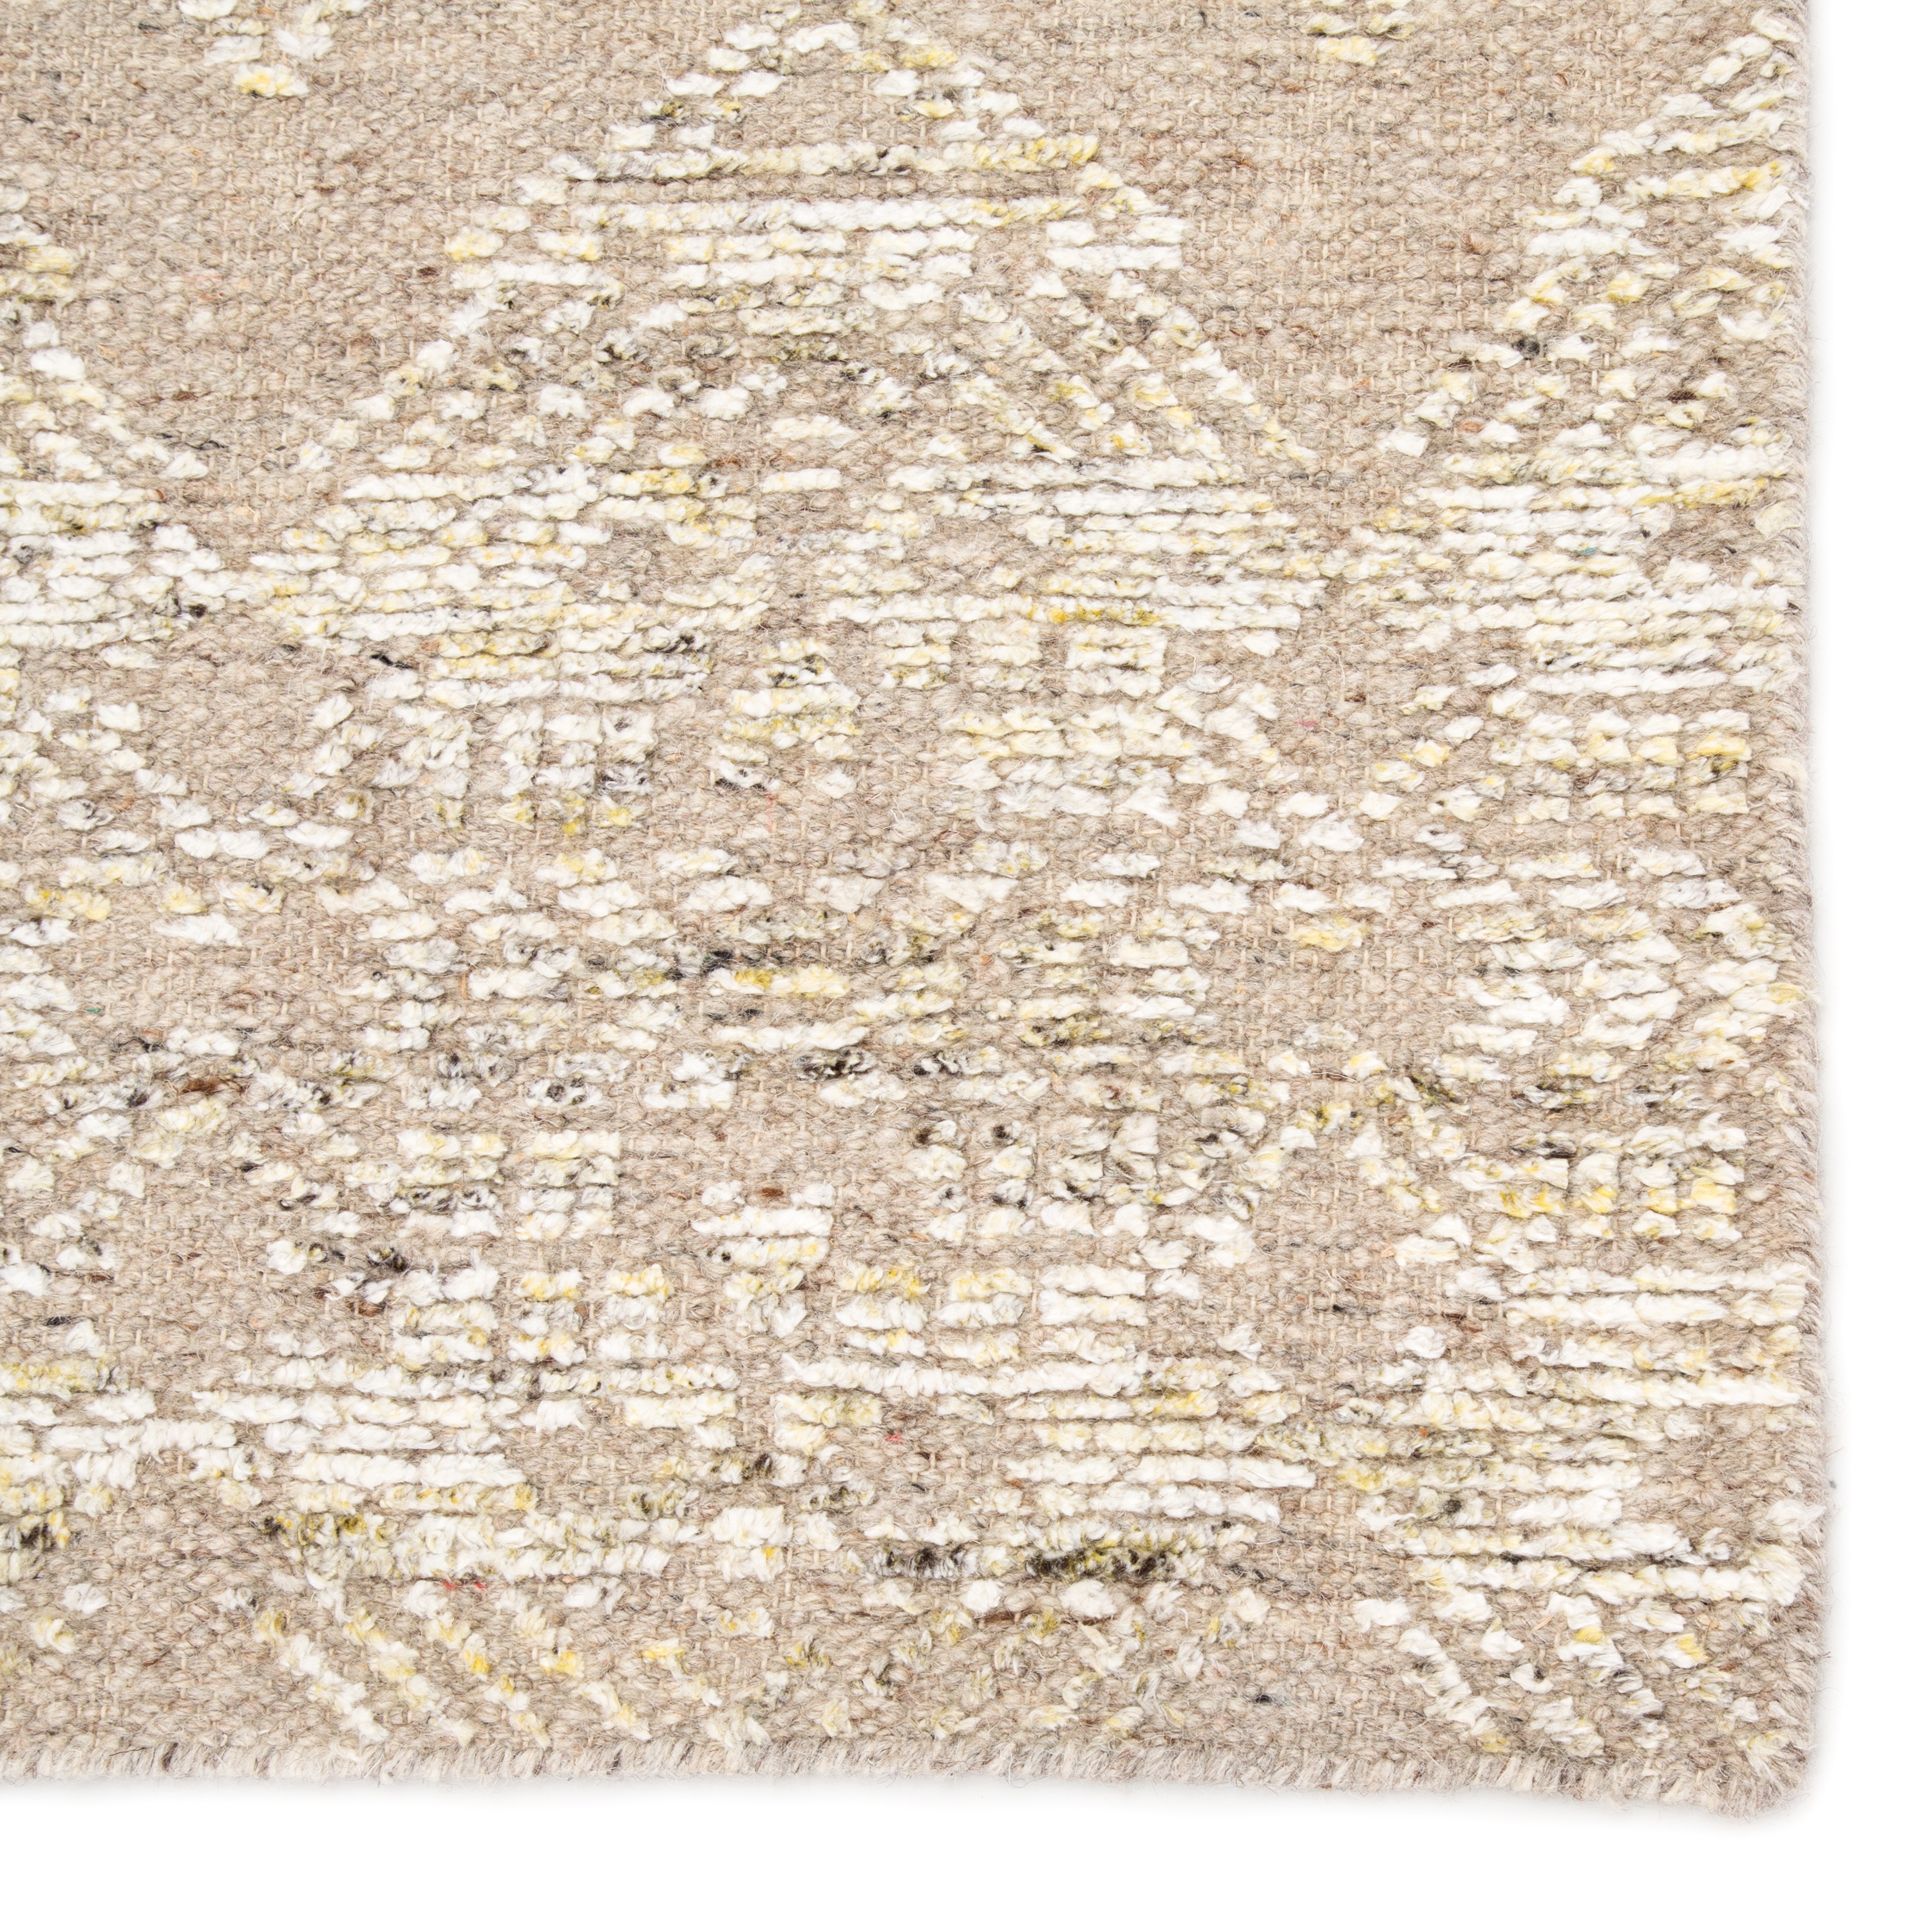 Dentelle Hand-Knotted Geometric Beige/ Gold Area Rug (8'X10') - Image 3